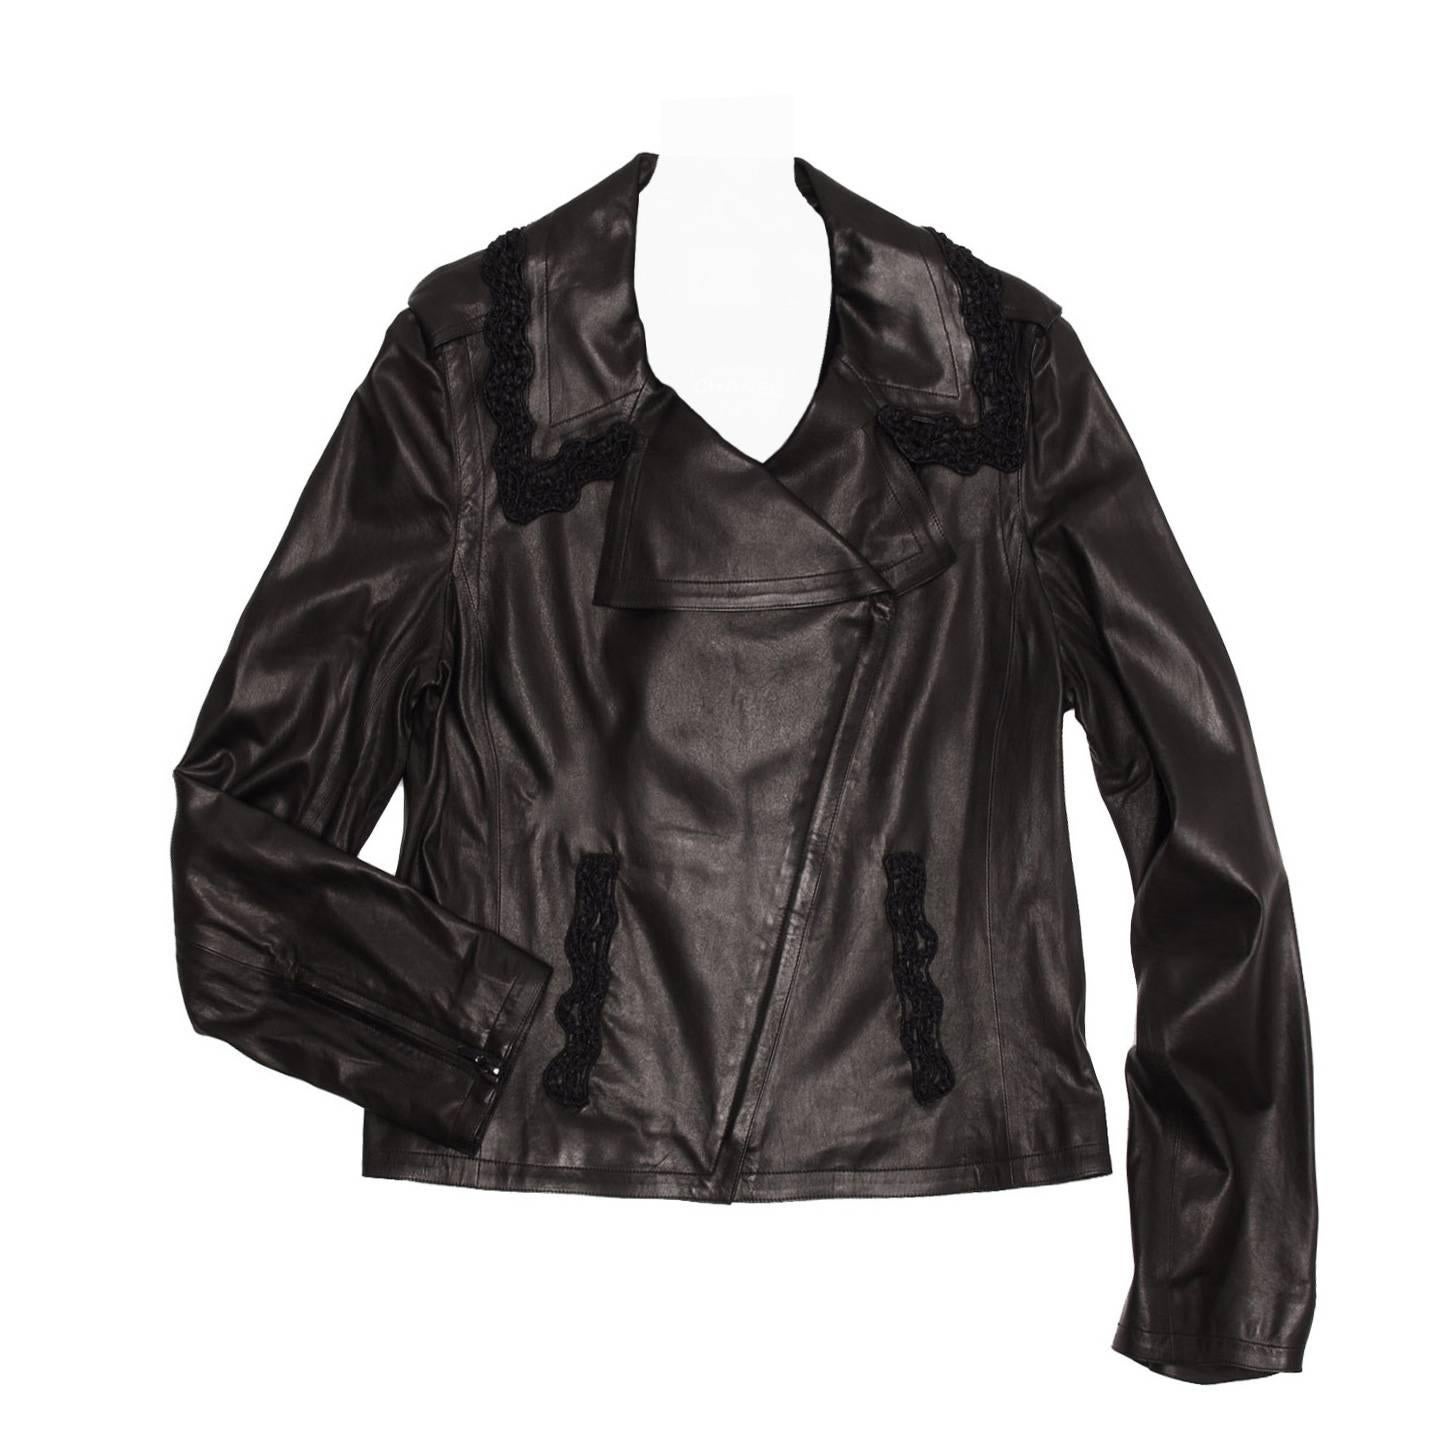 Chanel Black Leather & Lace Moto Style Jacket For Sale